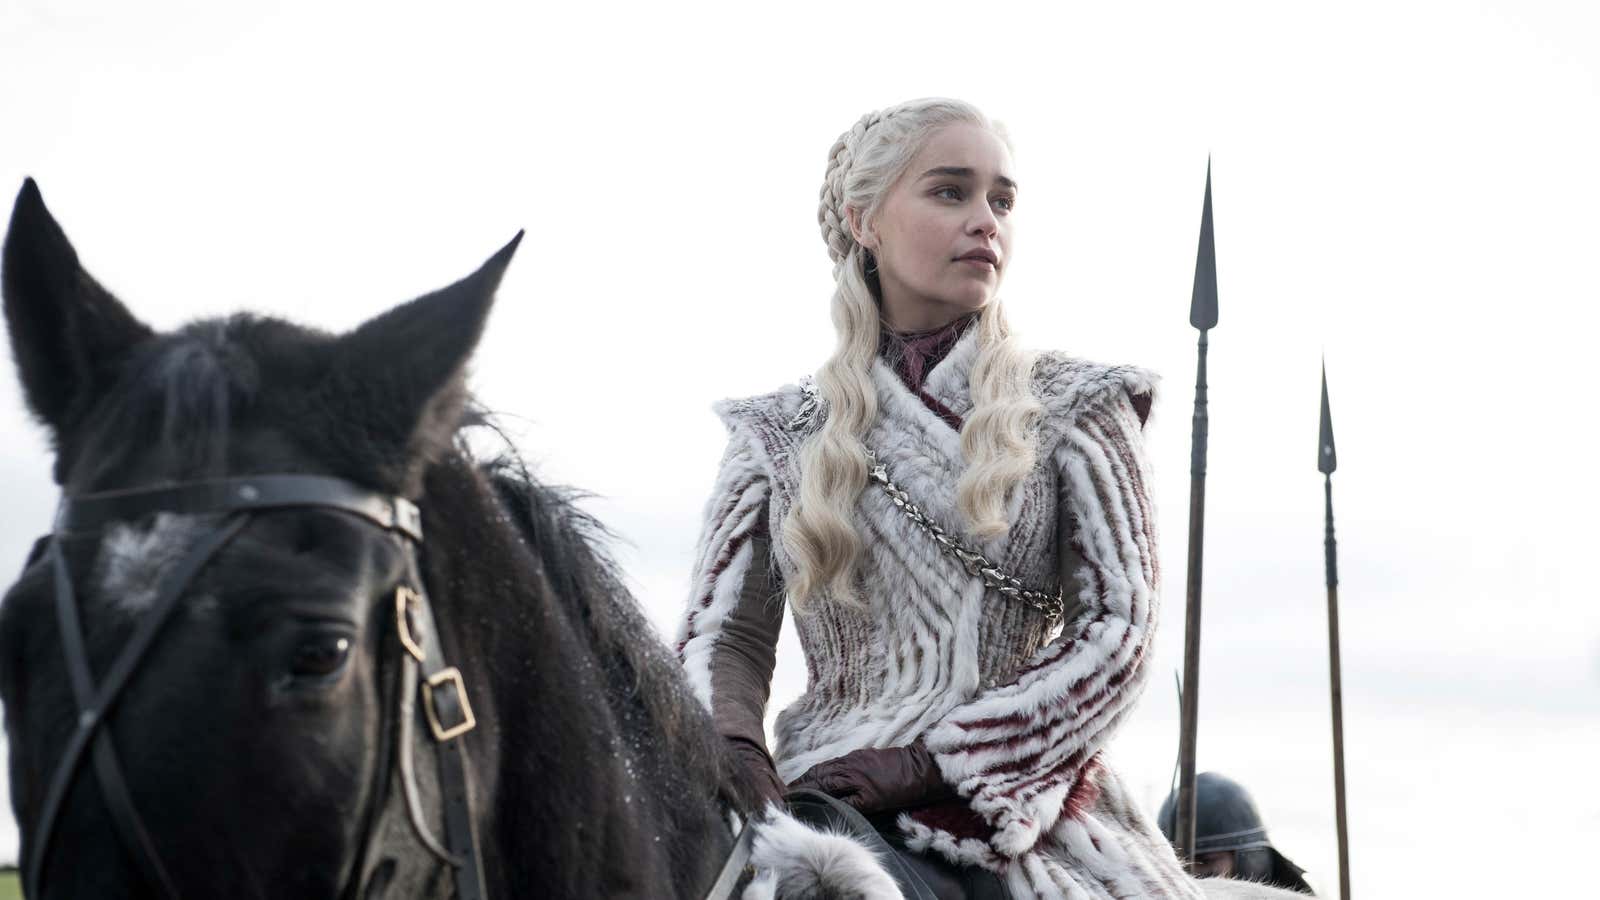 “Game of Thrones” has taught audiences to never get too attached to any one character.